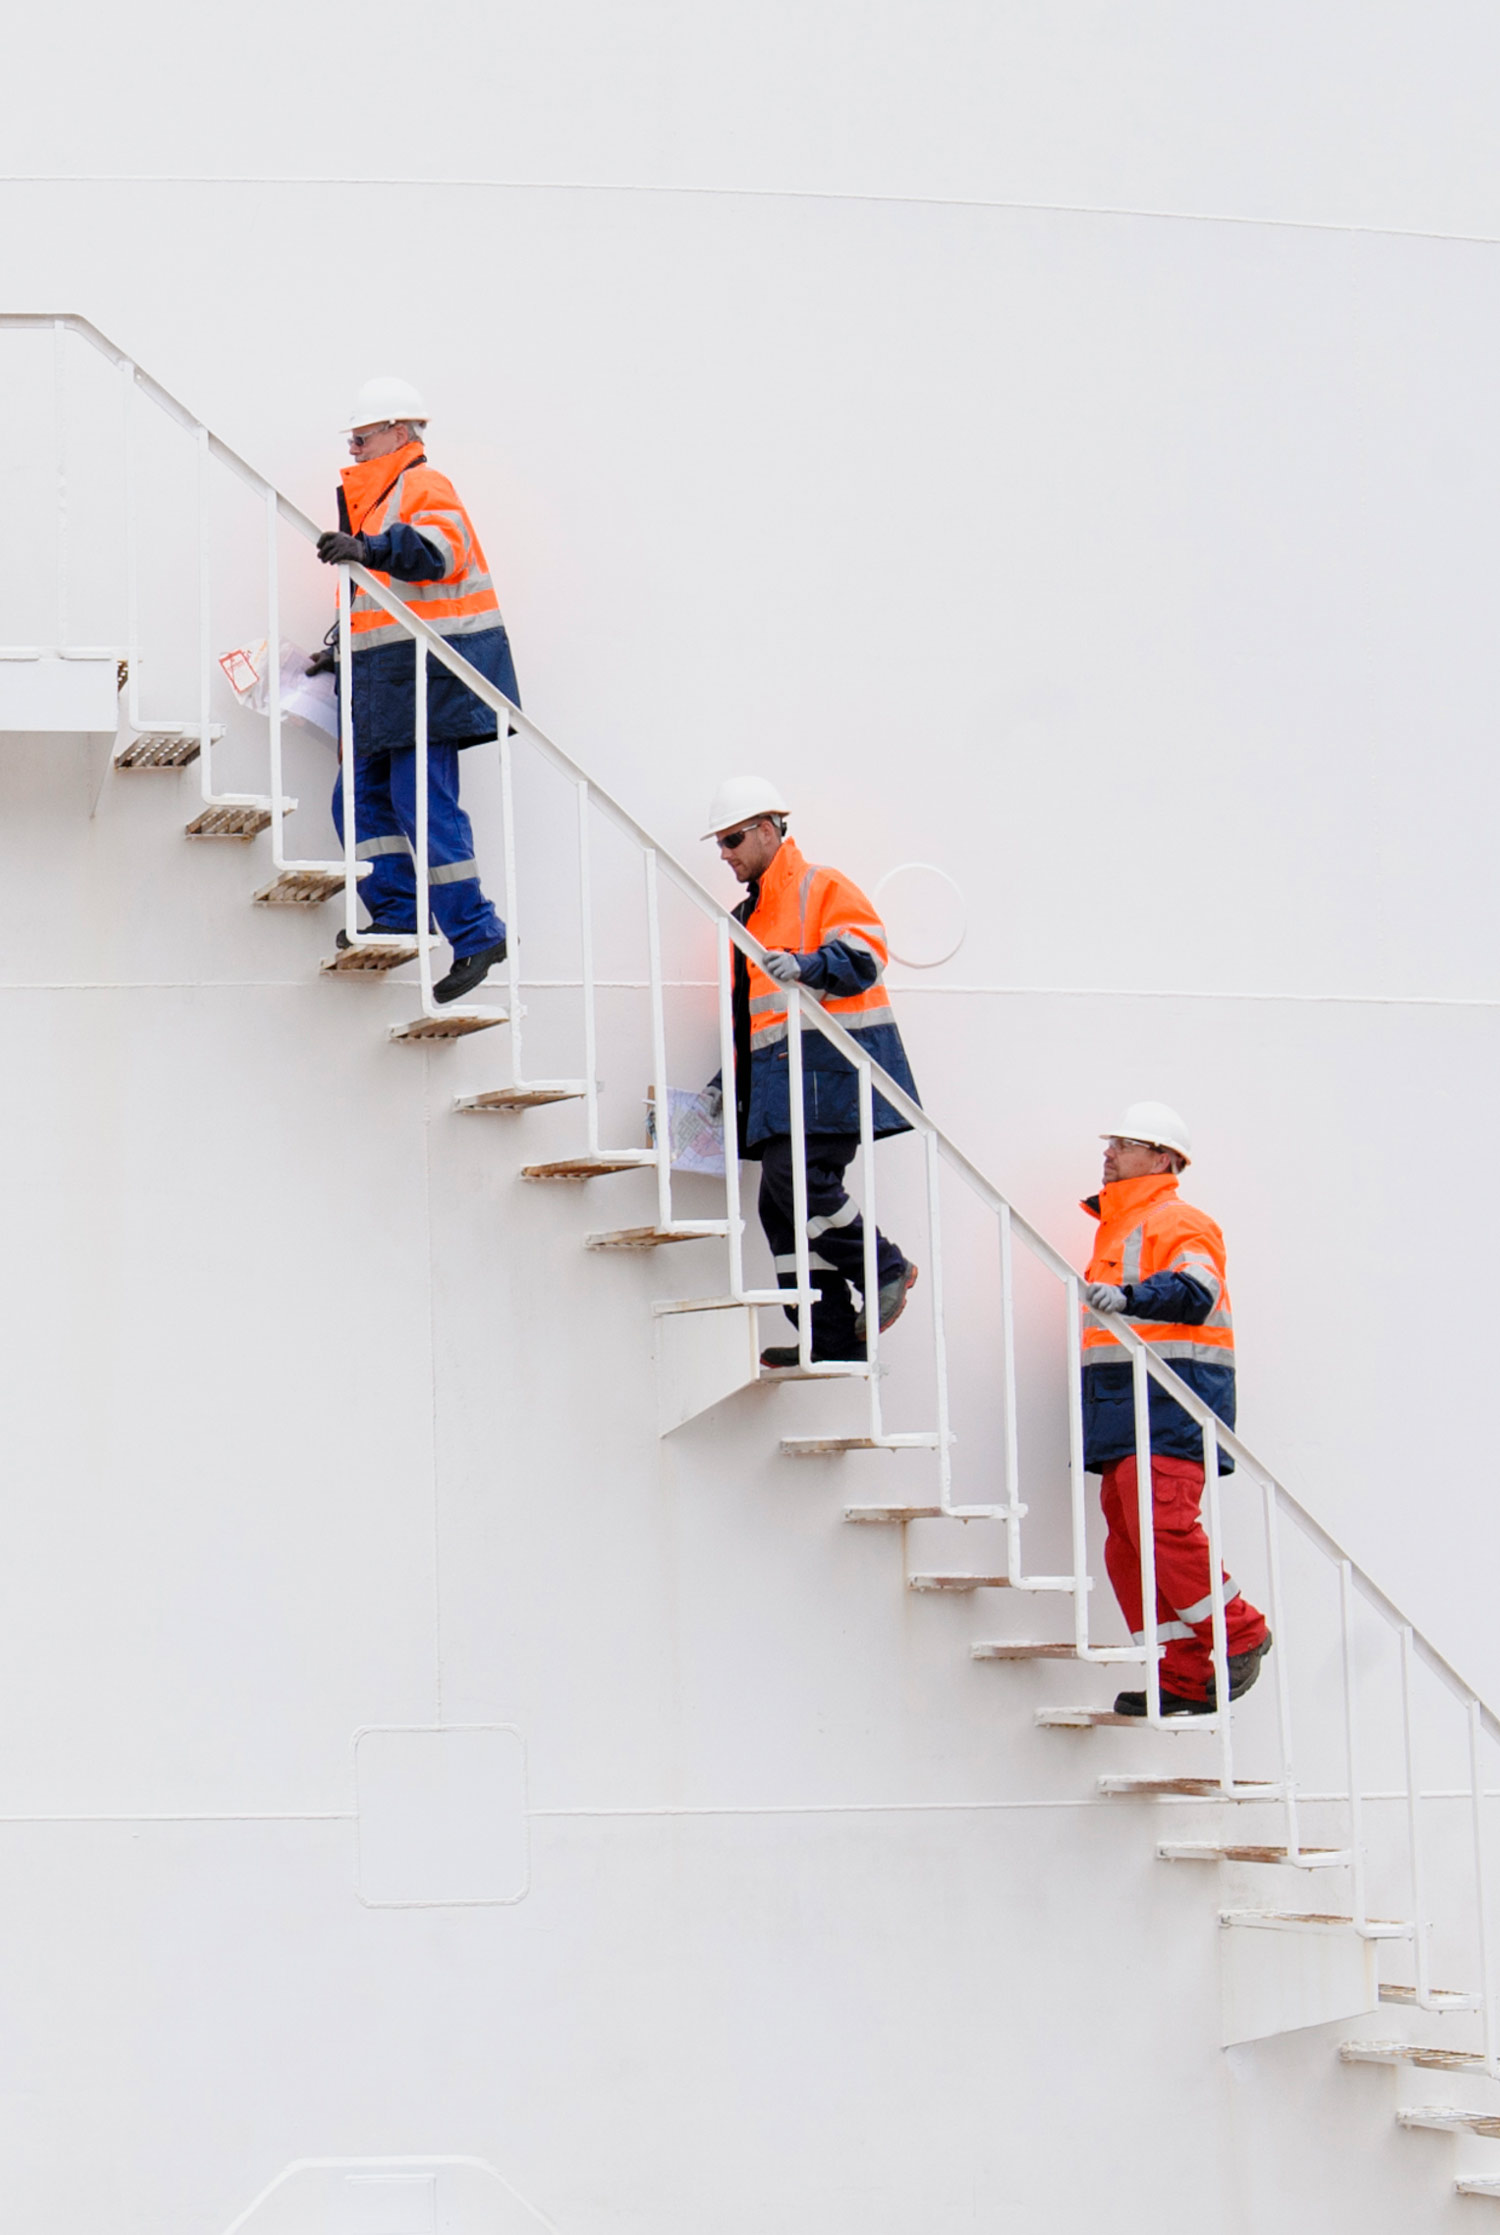 Three Men in hard hats wearing white hardhats and safety coats walking up a white metal staircase